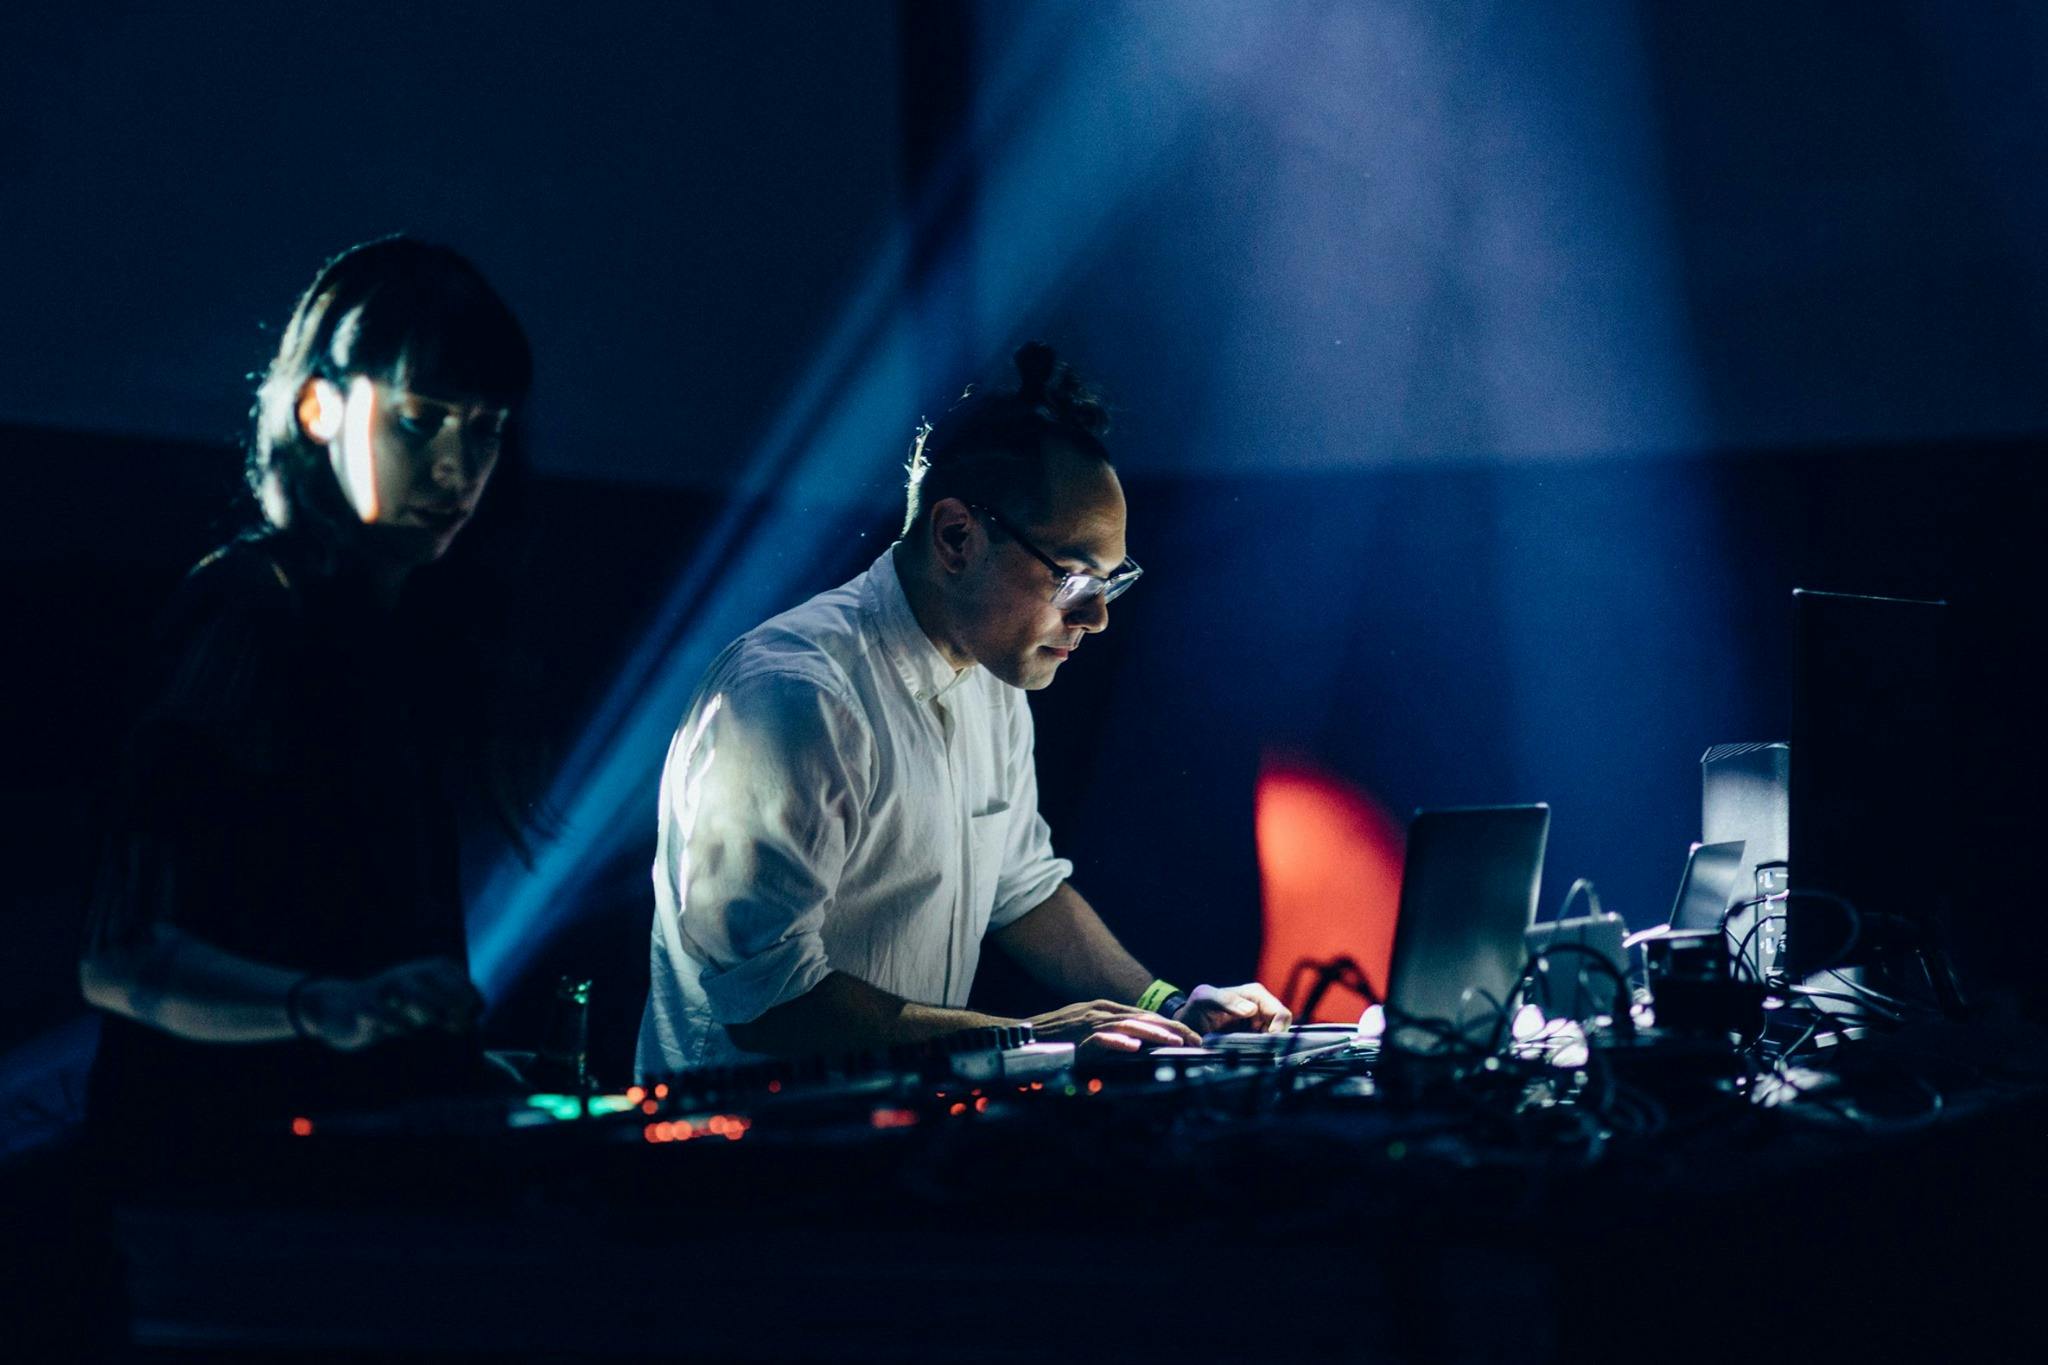 Rendering “The Mueller Report” as real-time visuals to music by Christina Chatfield (left). Paris, FR. 2019. Photo by Mathieu Foucher.